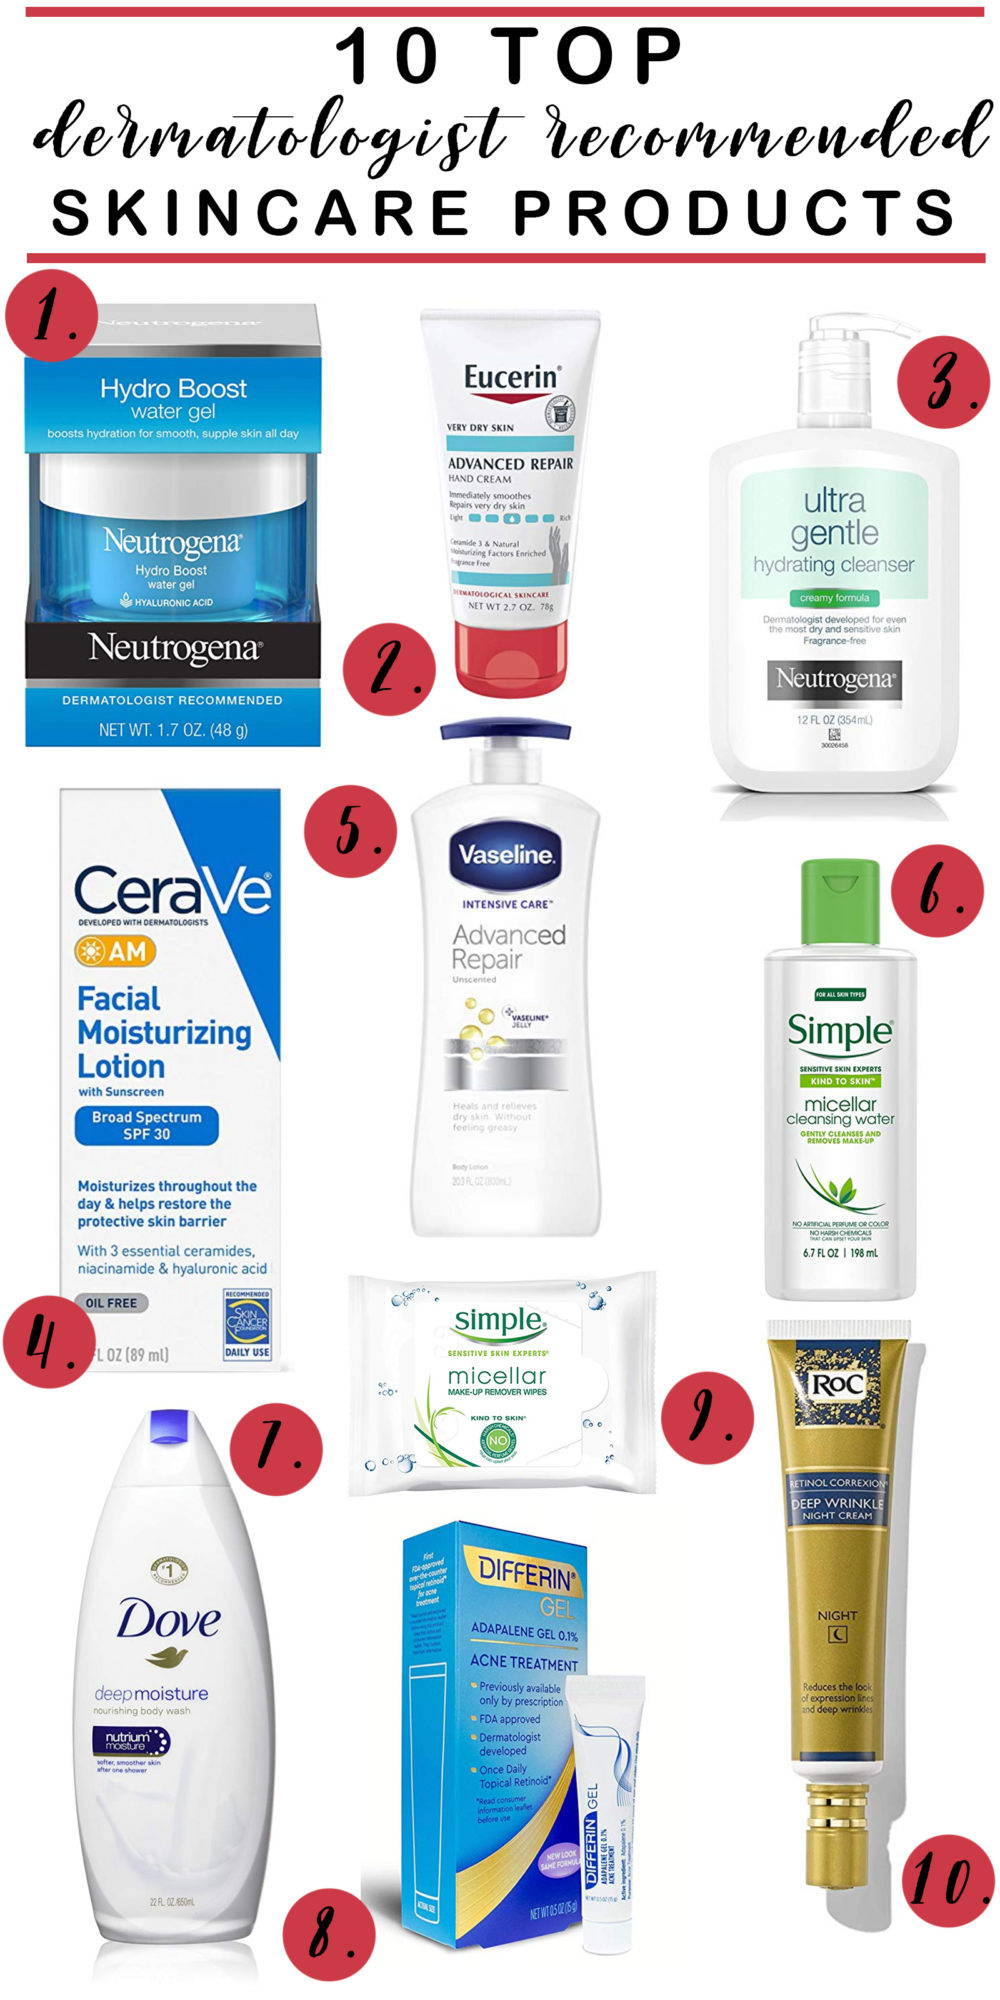 Petite Fashion Blog | Top 10 Dermatologist Recommended Drugstore Skincare Products | Neutrogena Hydroboost | Cerave Am | Simple Micellar Water | Roc Retinol | Eucerin Hand Lotion